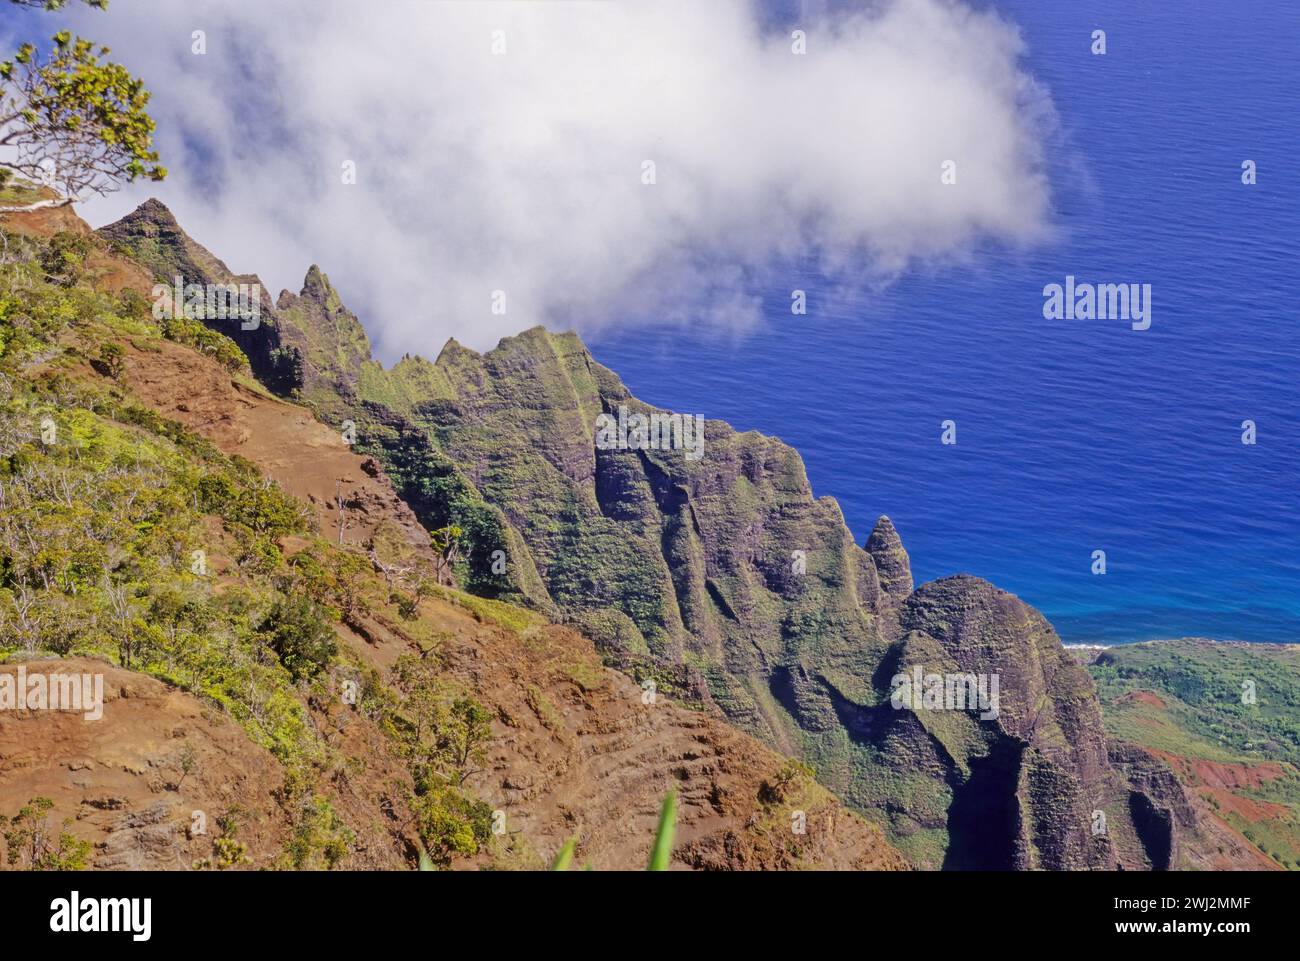 Nā Pali Coast State Park is a 6,175-acre state park in the U.S. state of Hawaii, located in the center of the rugged 16-mile (26 km) northwest side of Stock Photo